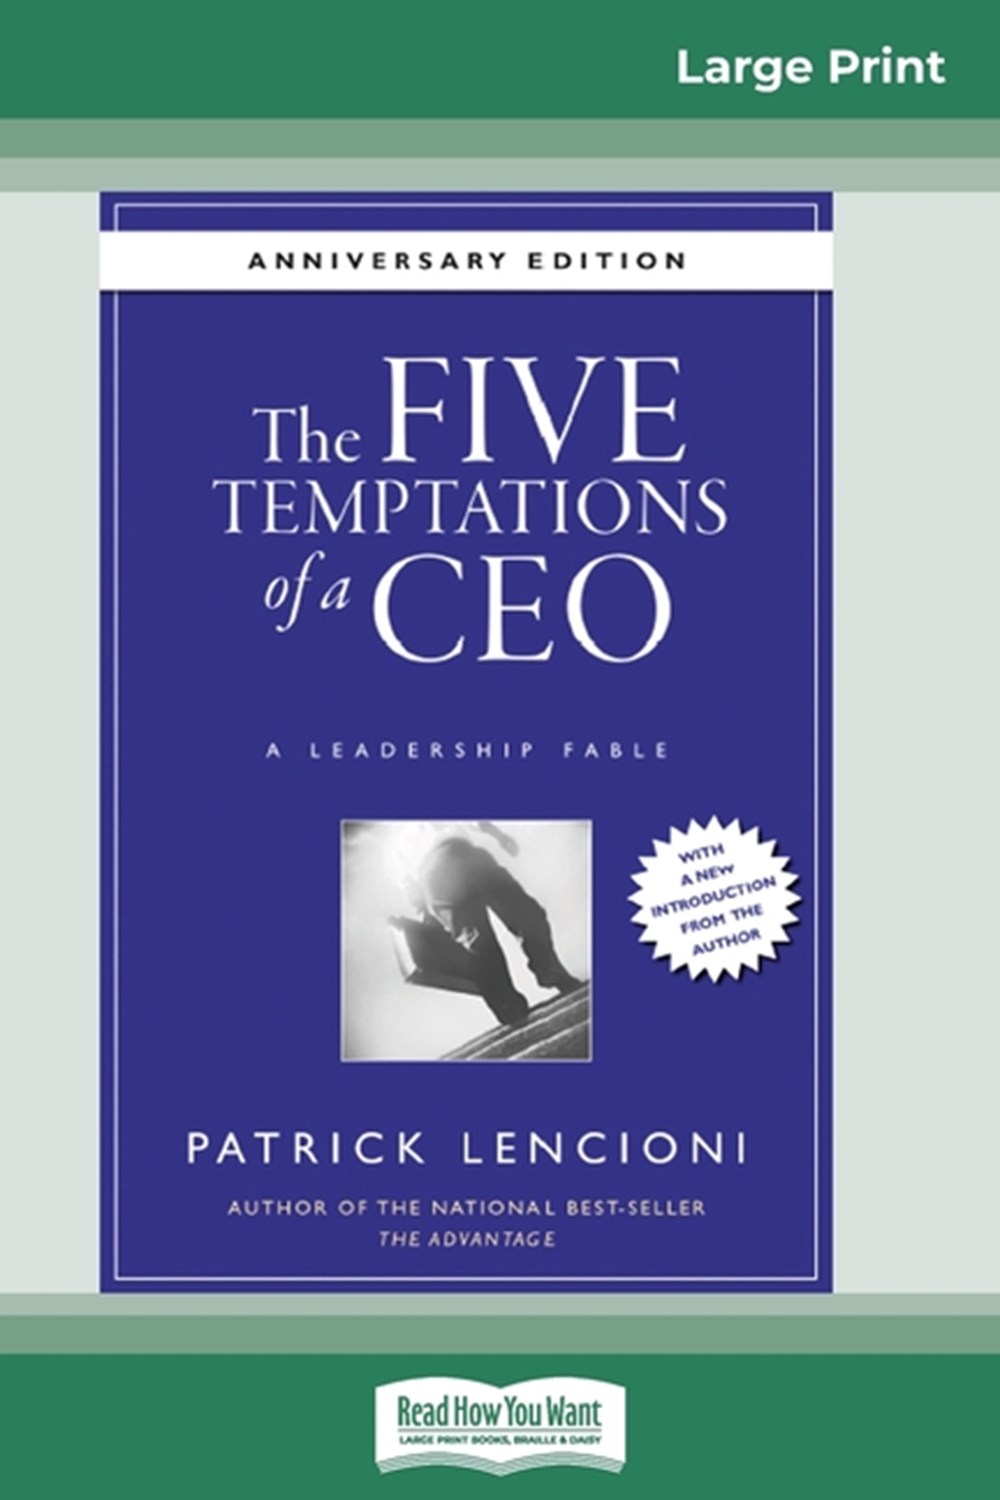 Five Temptations of a CEO A Leadership Fable, 10th Anniversary Edition (16pt Large Print Edition)